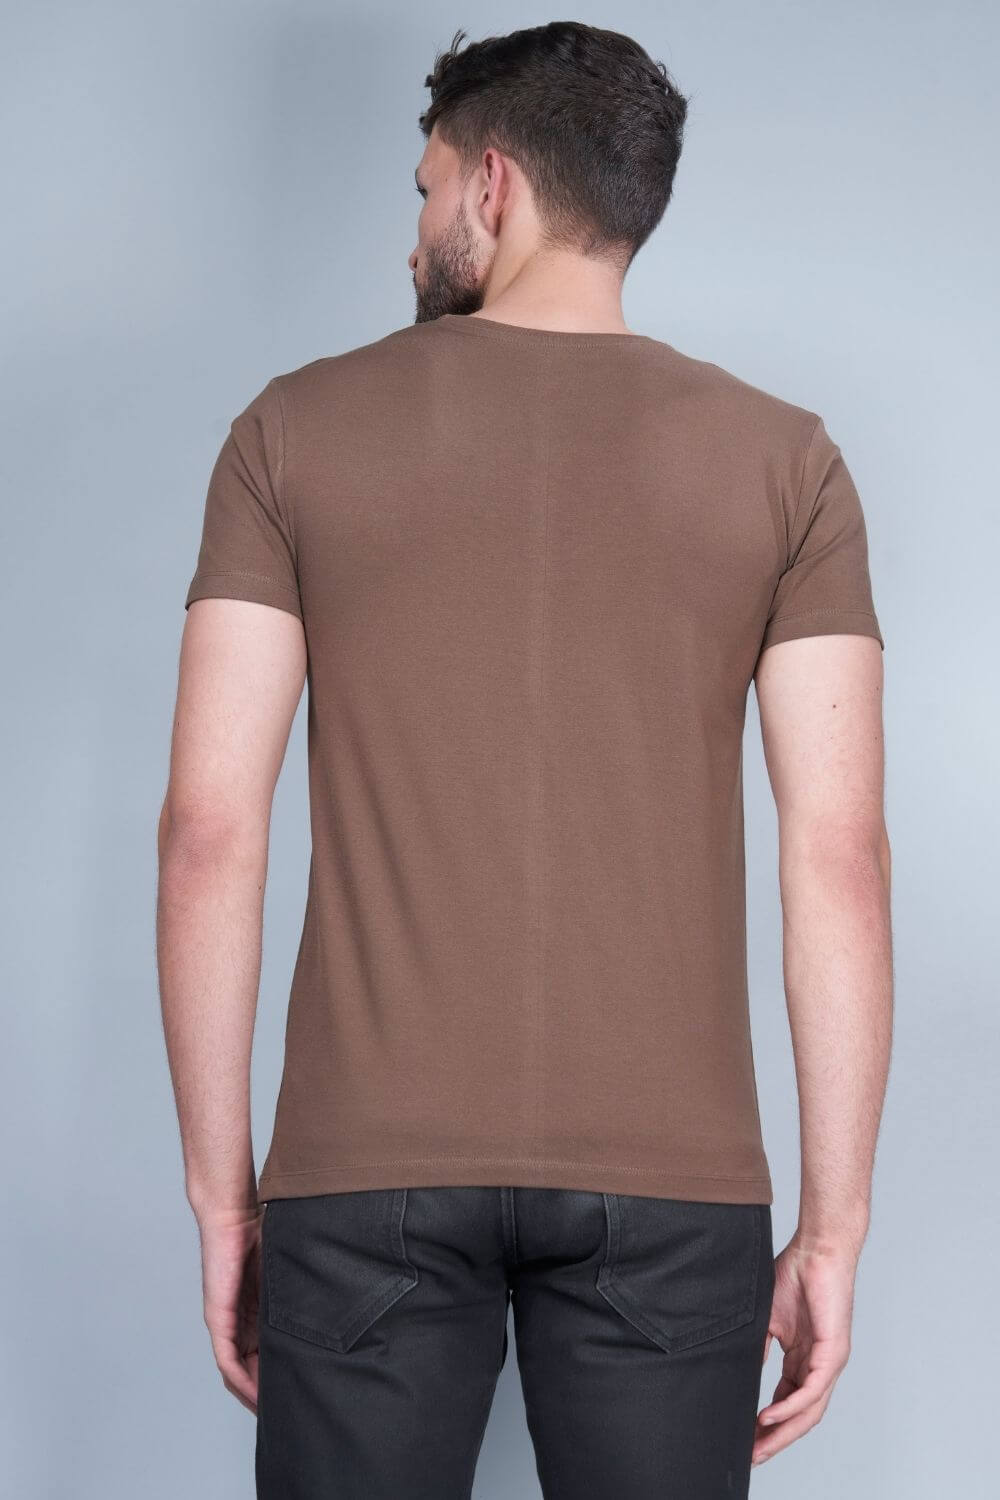 Brown colored, cotton solid T shirt for men with half sleeves and round neck from vibgyor series collection, back view.